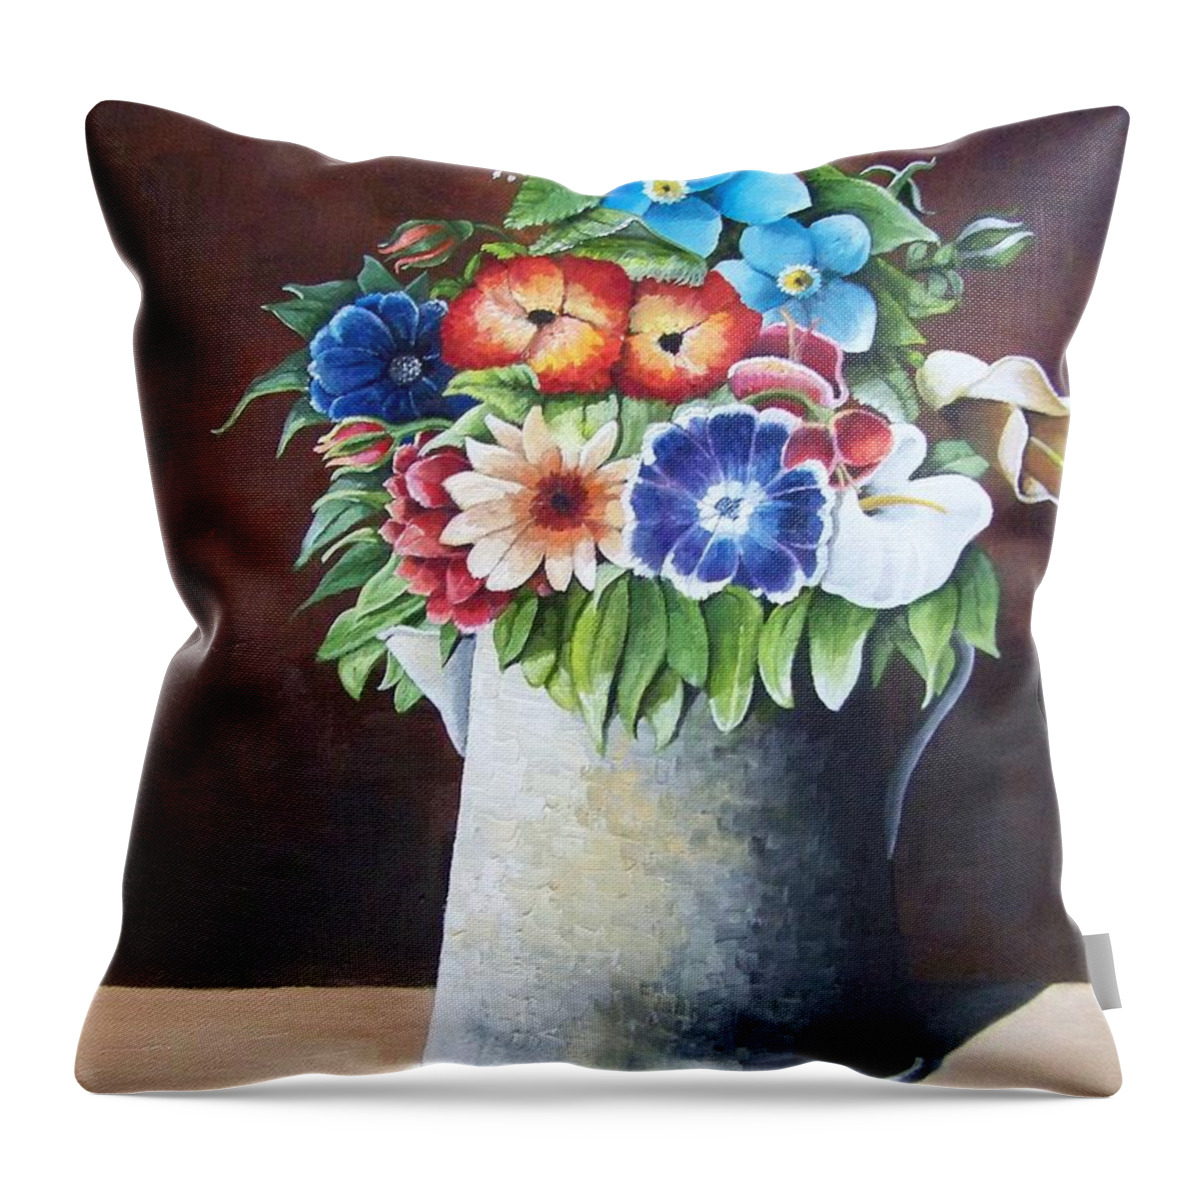 A Metal Watering Can With Numerous Type Of Flowers Throw Pillow featuring the painting Deanne's Flower Pot by Martin Schmidt